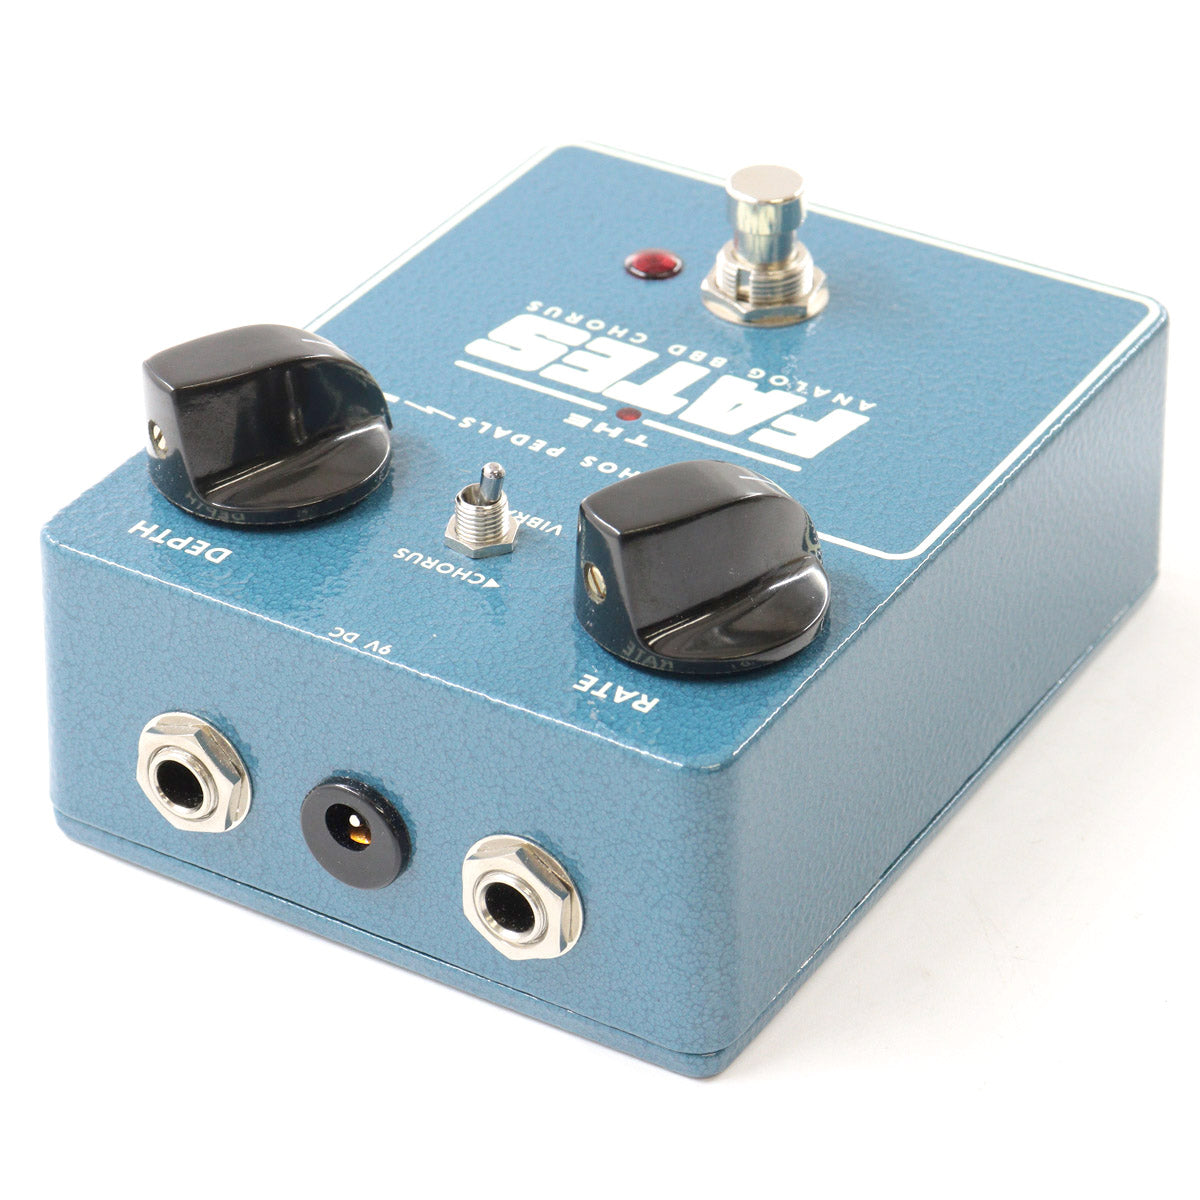 USED MYTHOS PEDALS / THE FATES Chorus for guitar [08]